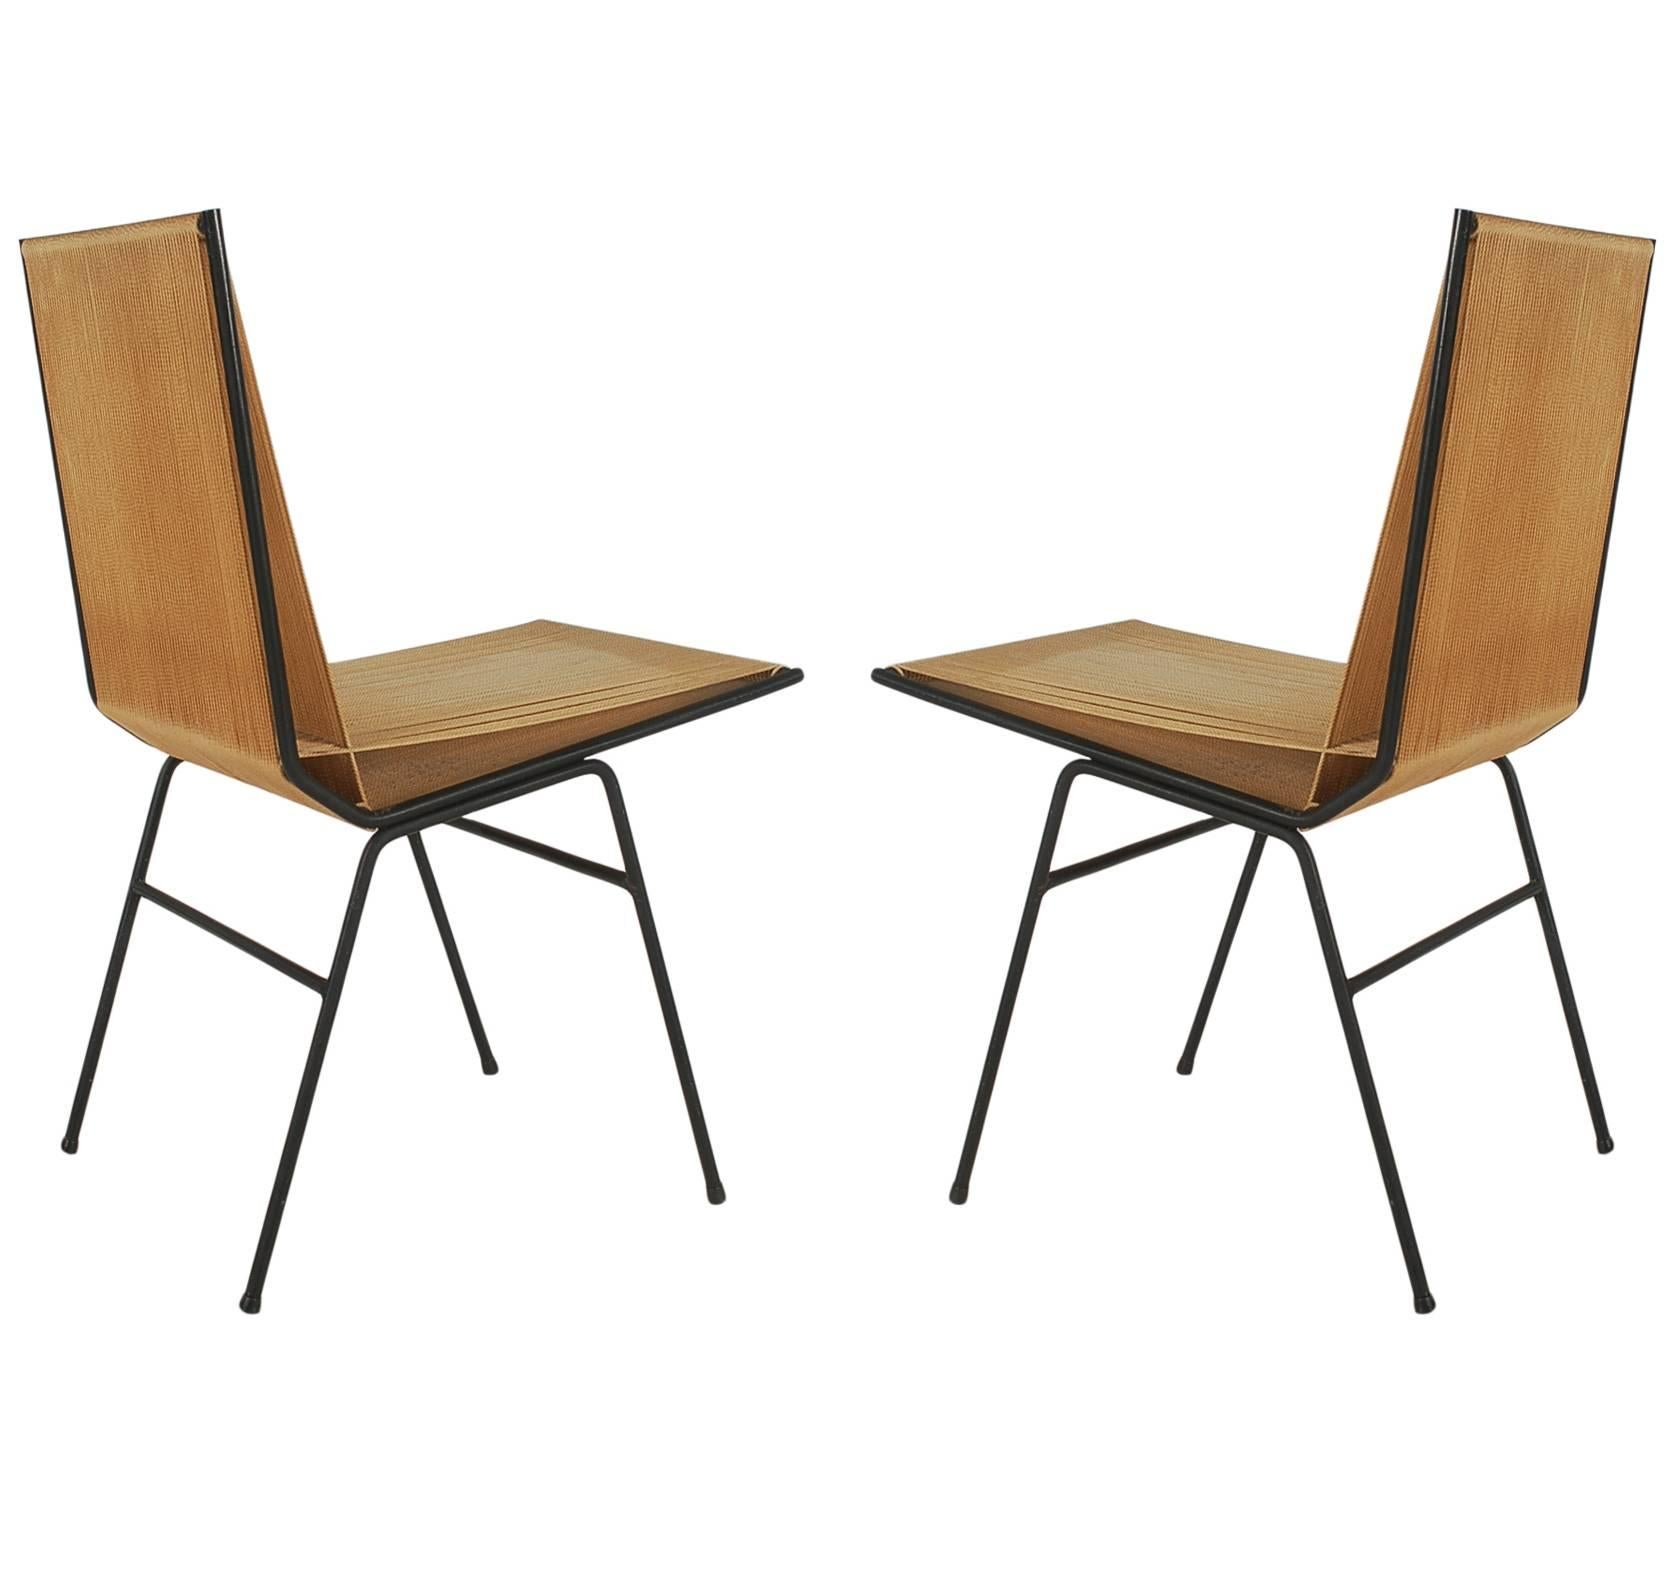 American Pair of Mid-Century Modern Allan Gould Cord or String Chairs with Iron Frames